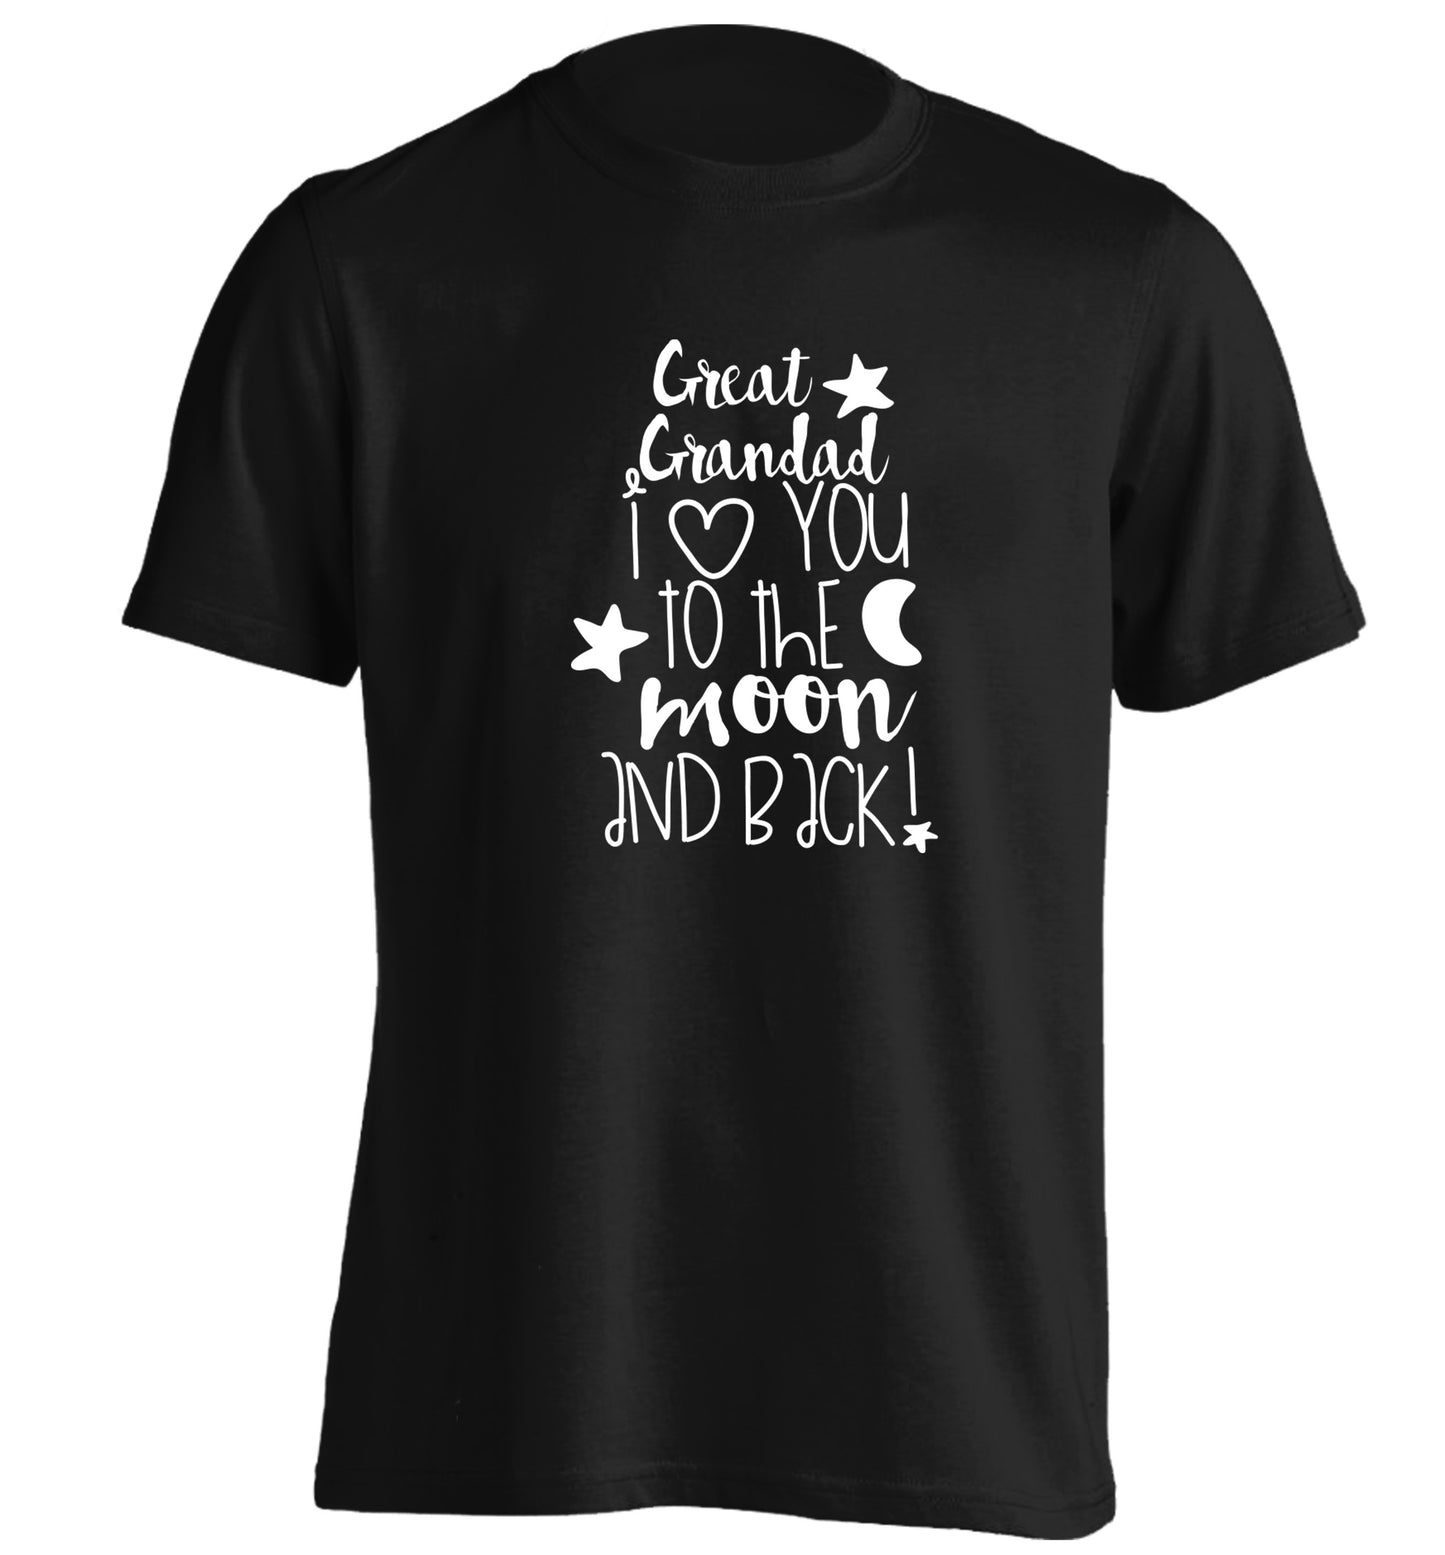 Great Grandad I love you to the moon and back adults unisex black Tshirt 2XL